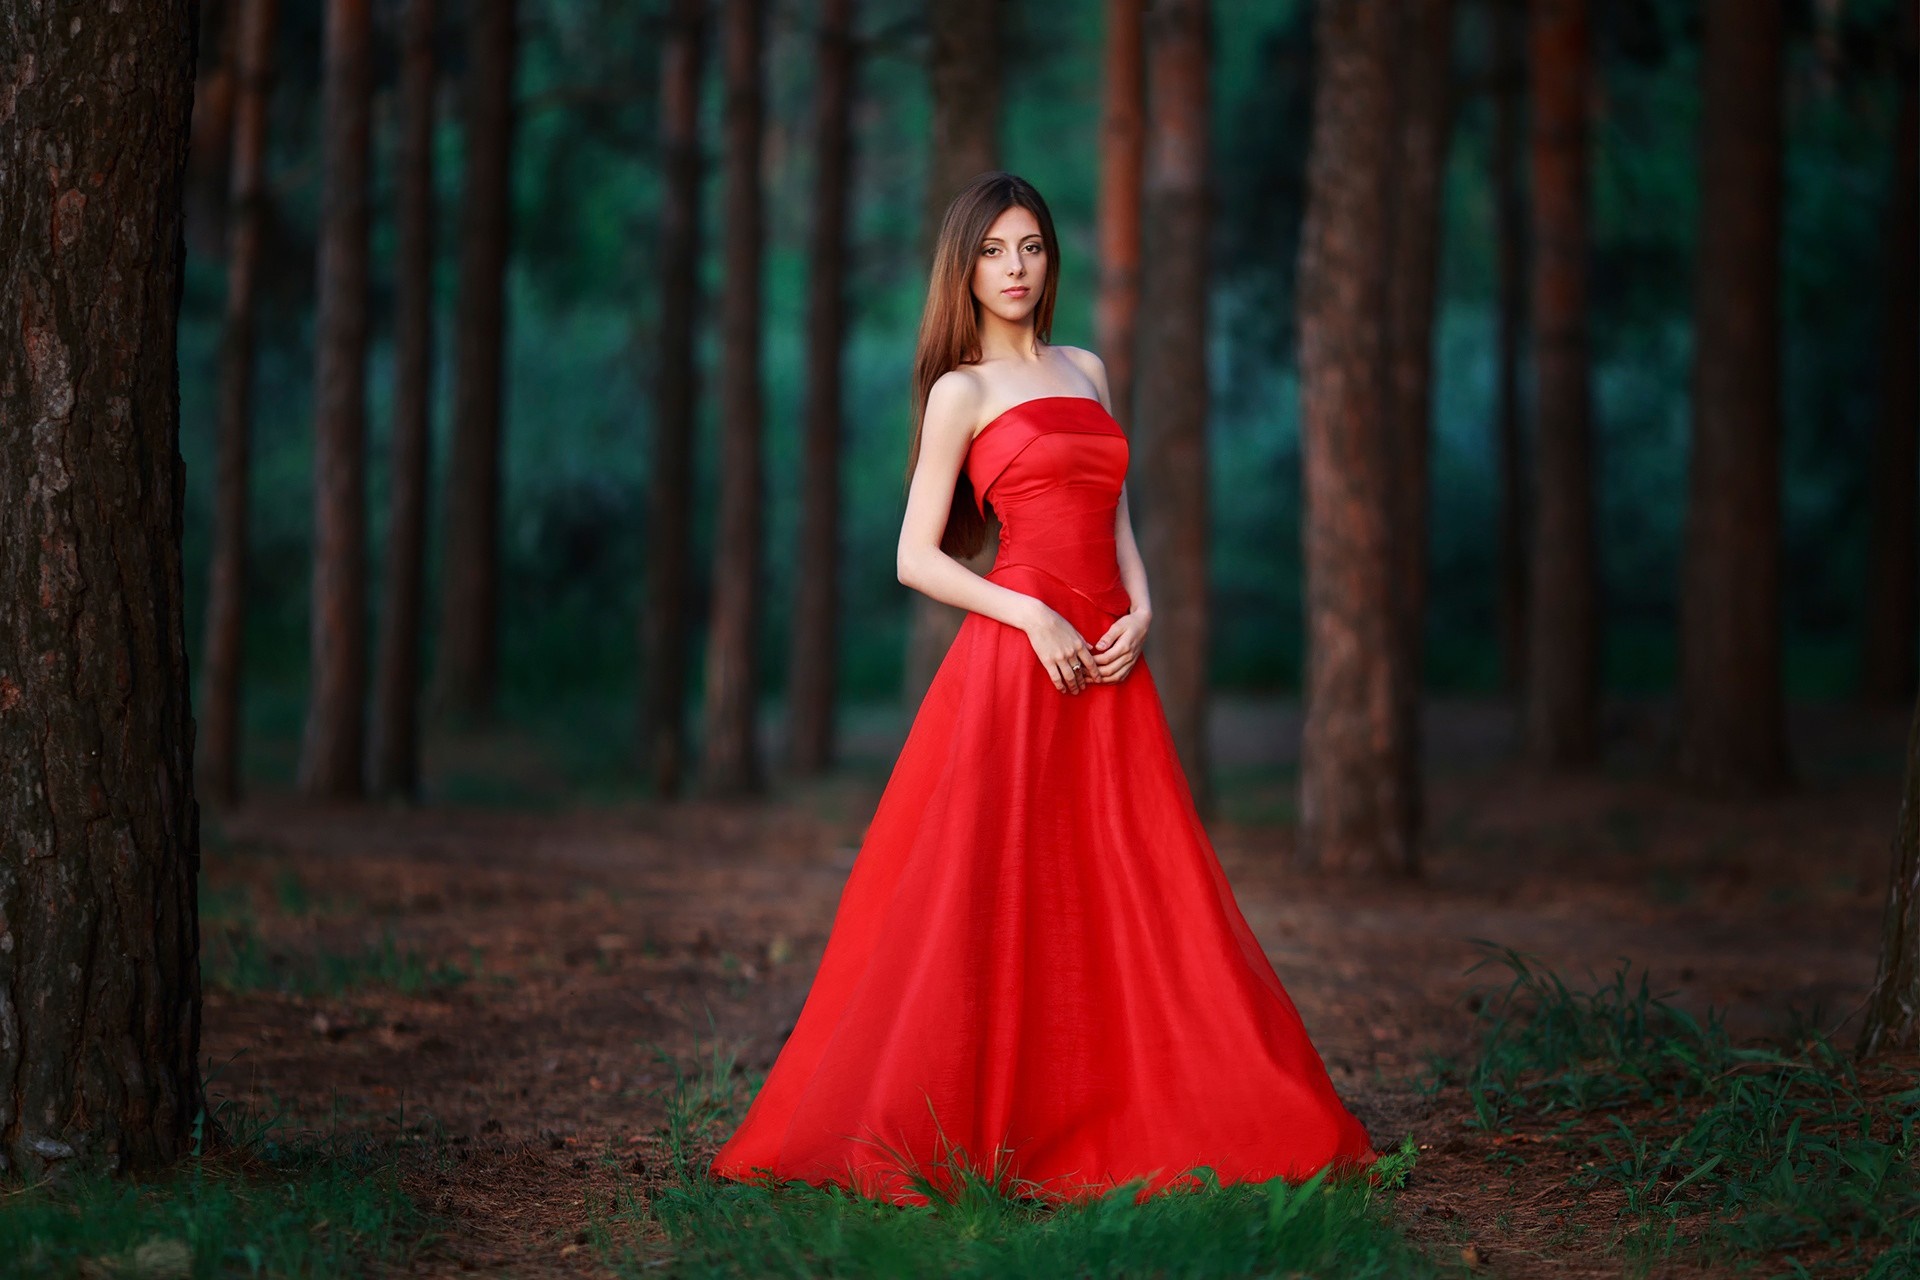 1130365 trees, women, model, red, photography, dress, green, wedding dress, Person, clothing, prom, woman, bride, gown, portrait photography, photo shoot, bridal clothing, formal wear, quincea era, bridesmaid